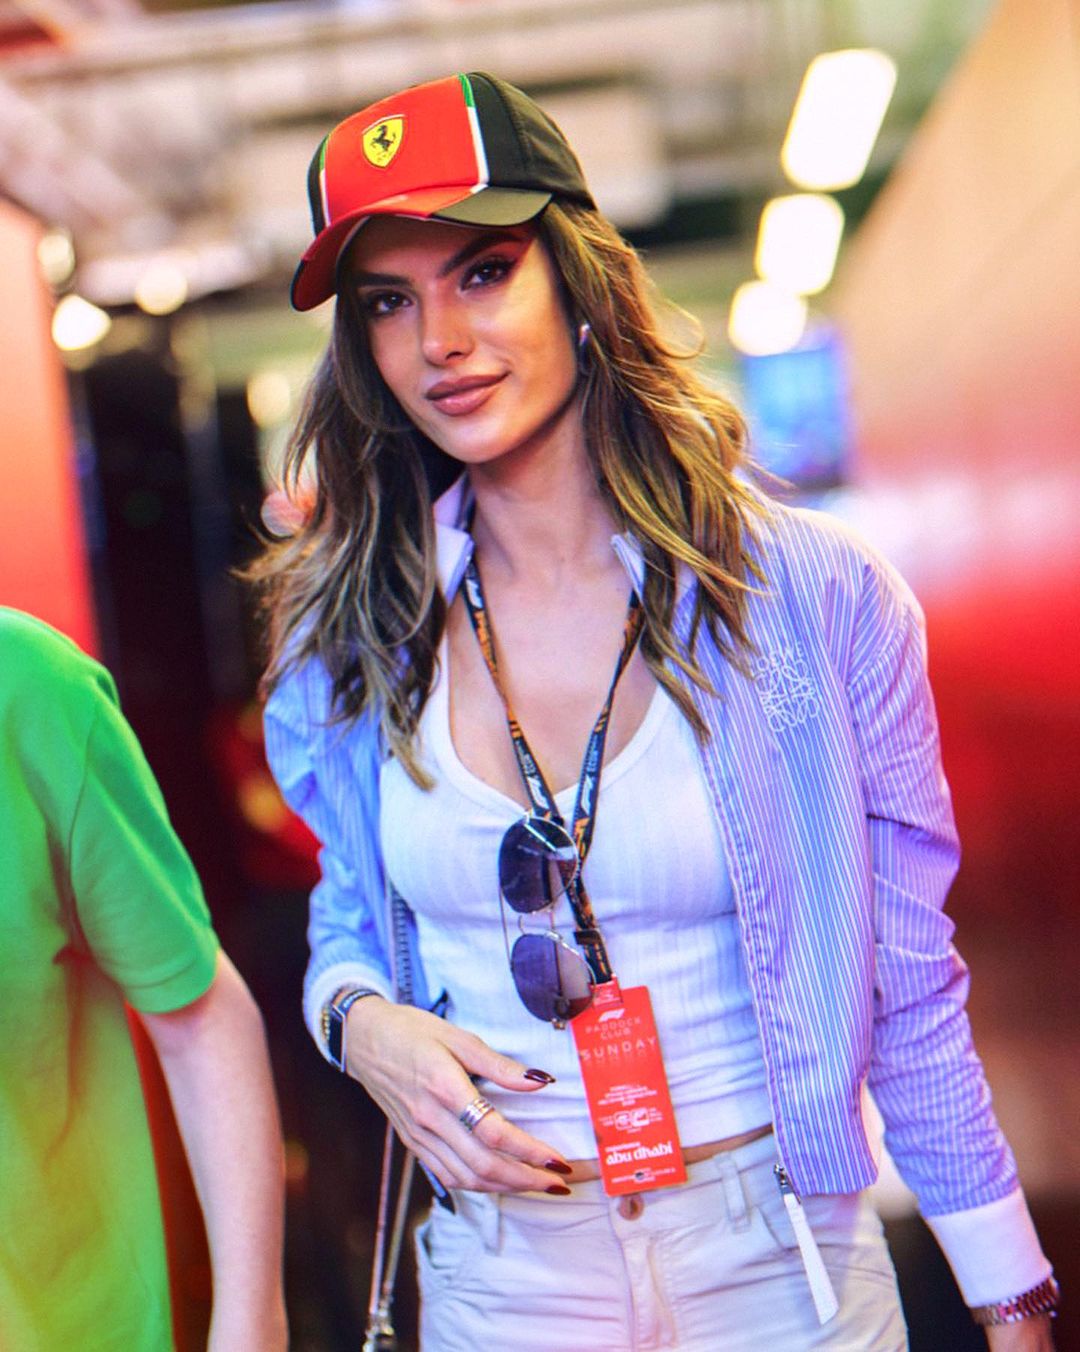 Photos n°1 : Alessandra Ambrosio is In The Fast Lane!